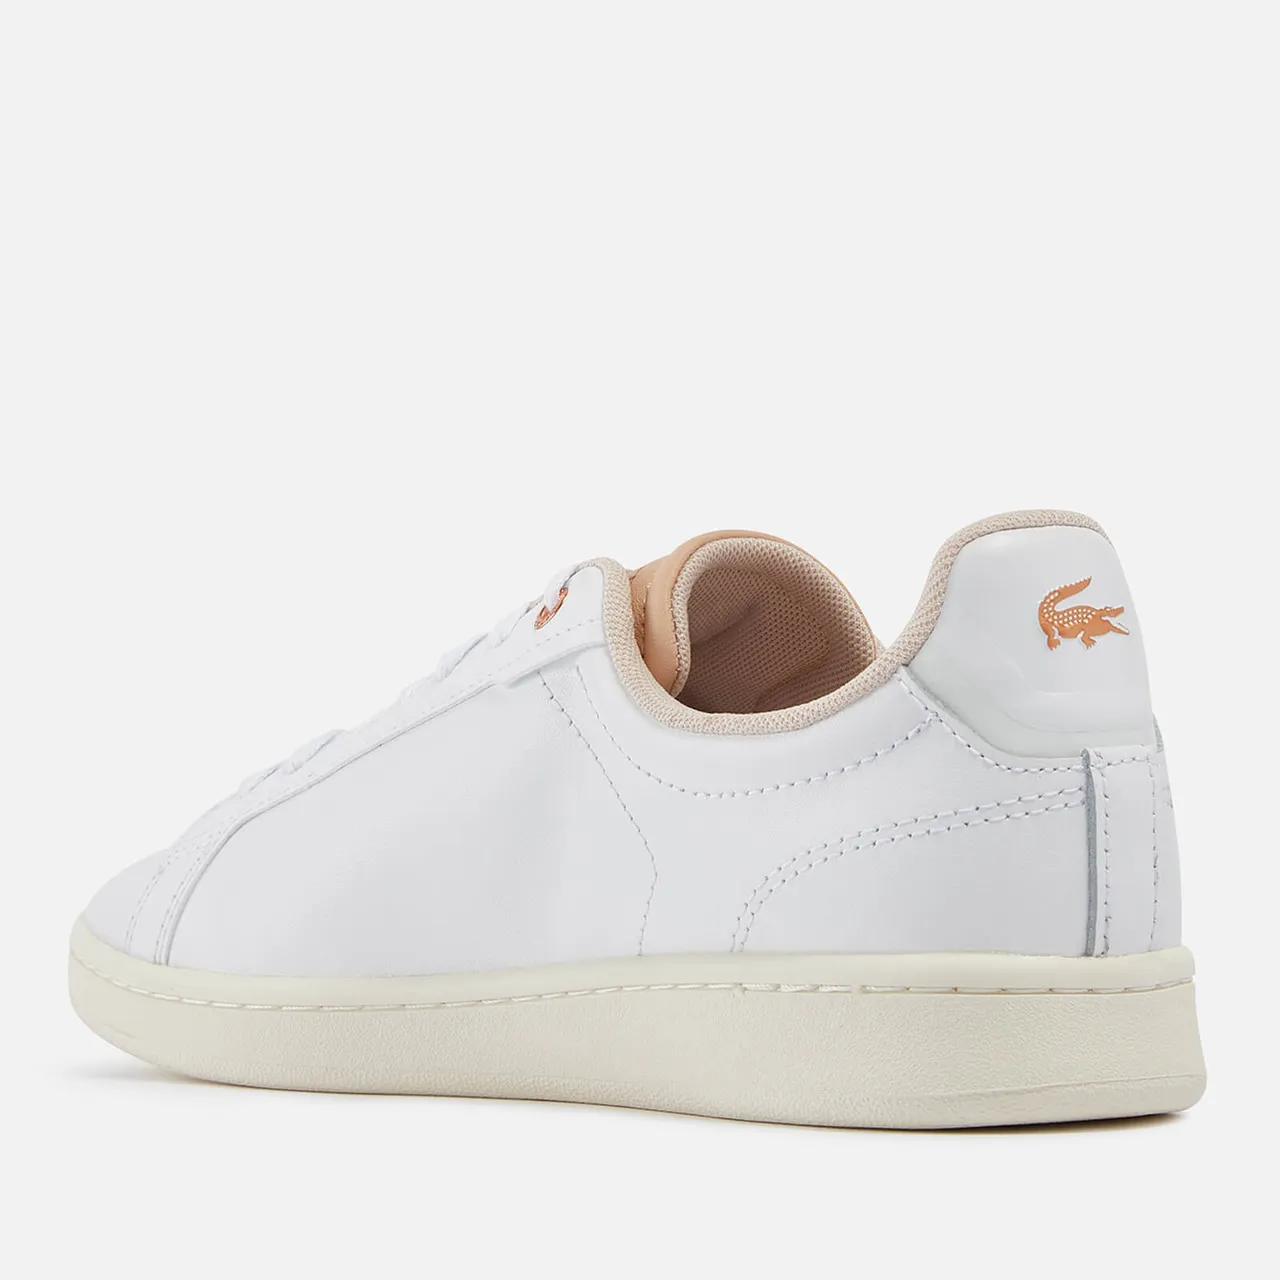 Lacoste Carnaby Pro 222 4 Leather Cupsole Trainers - UK